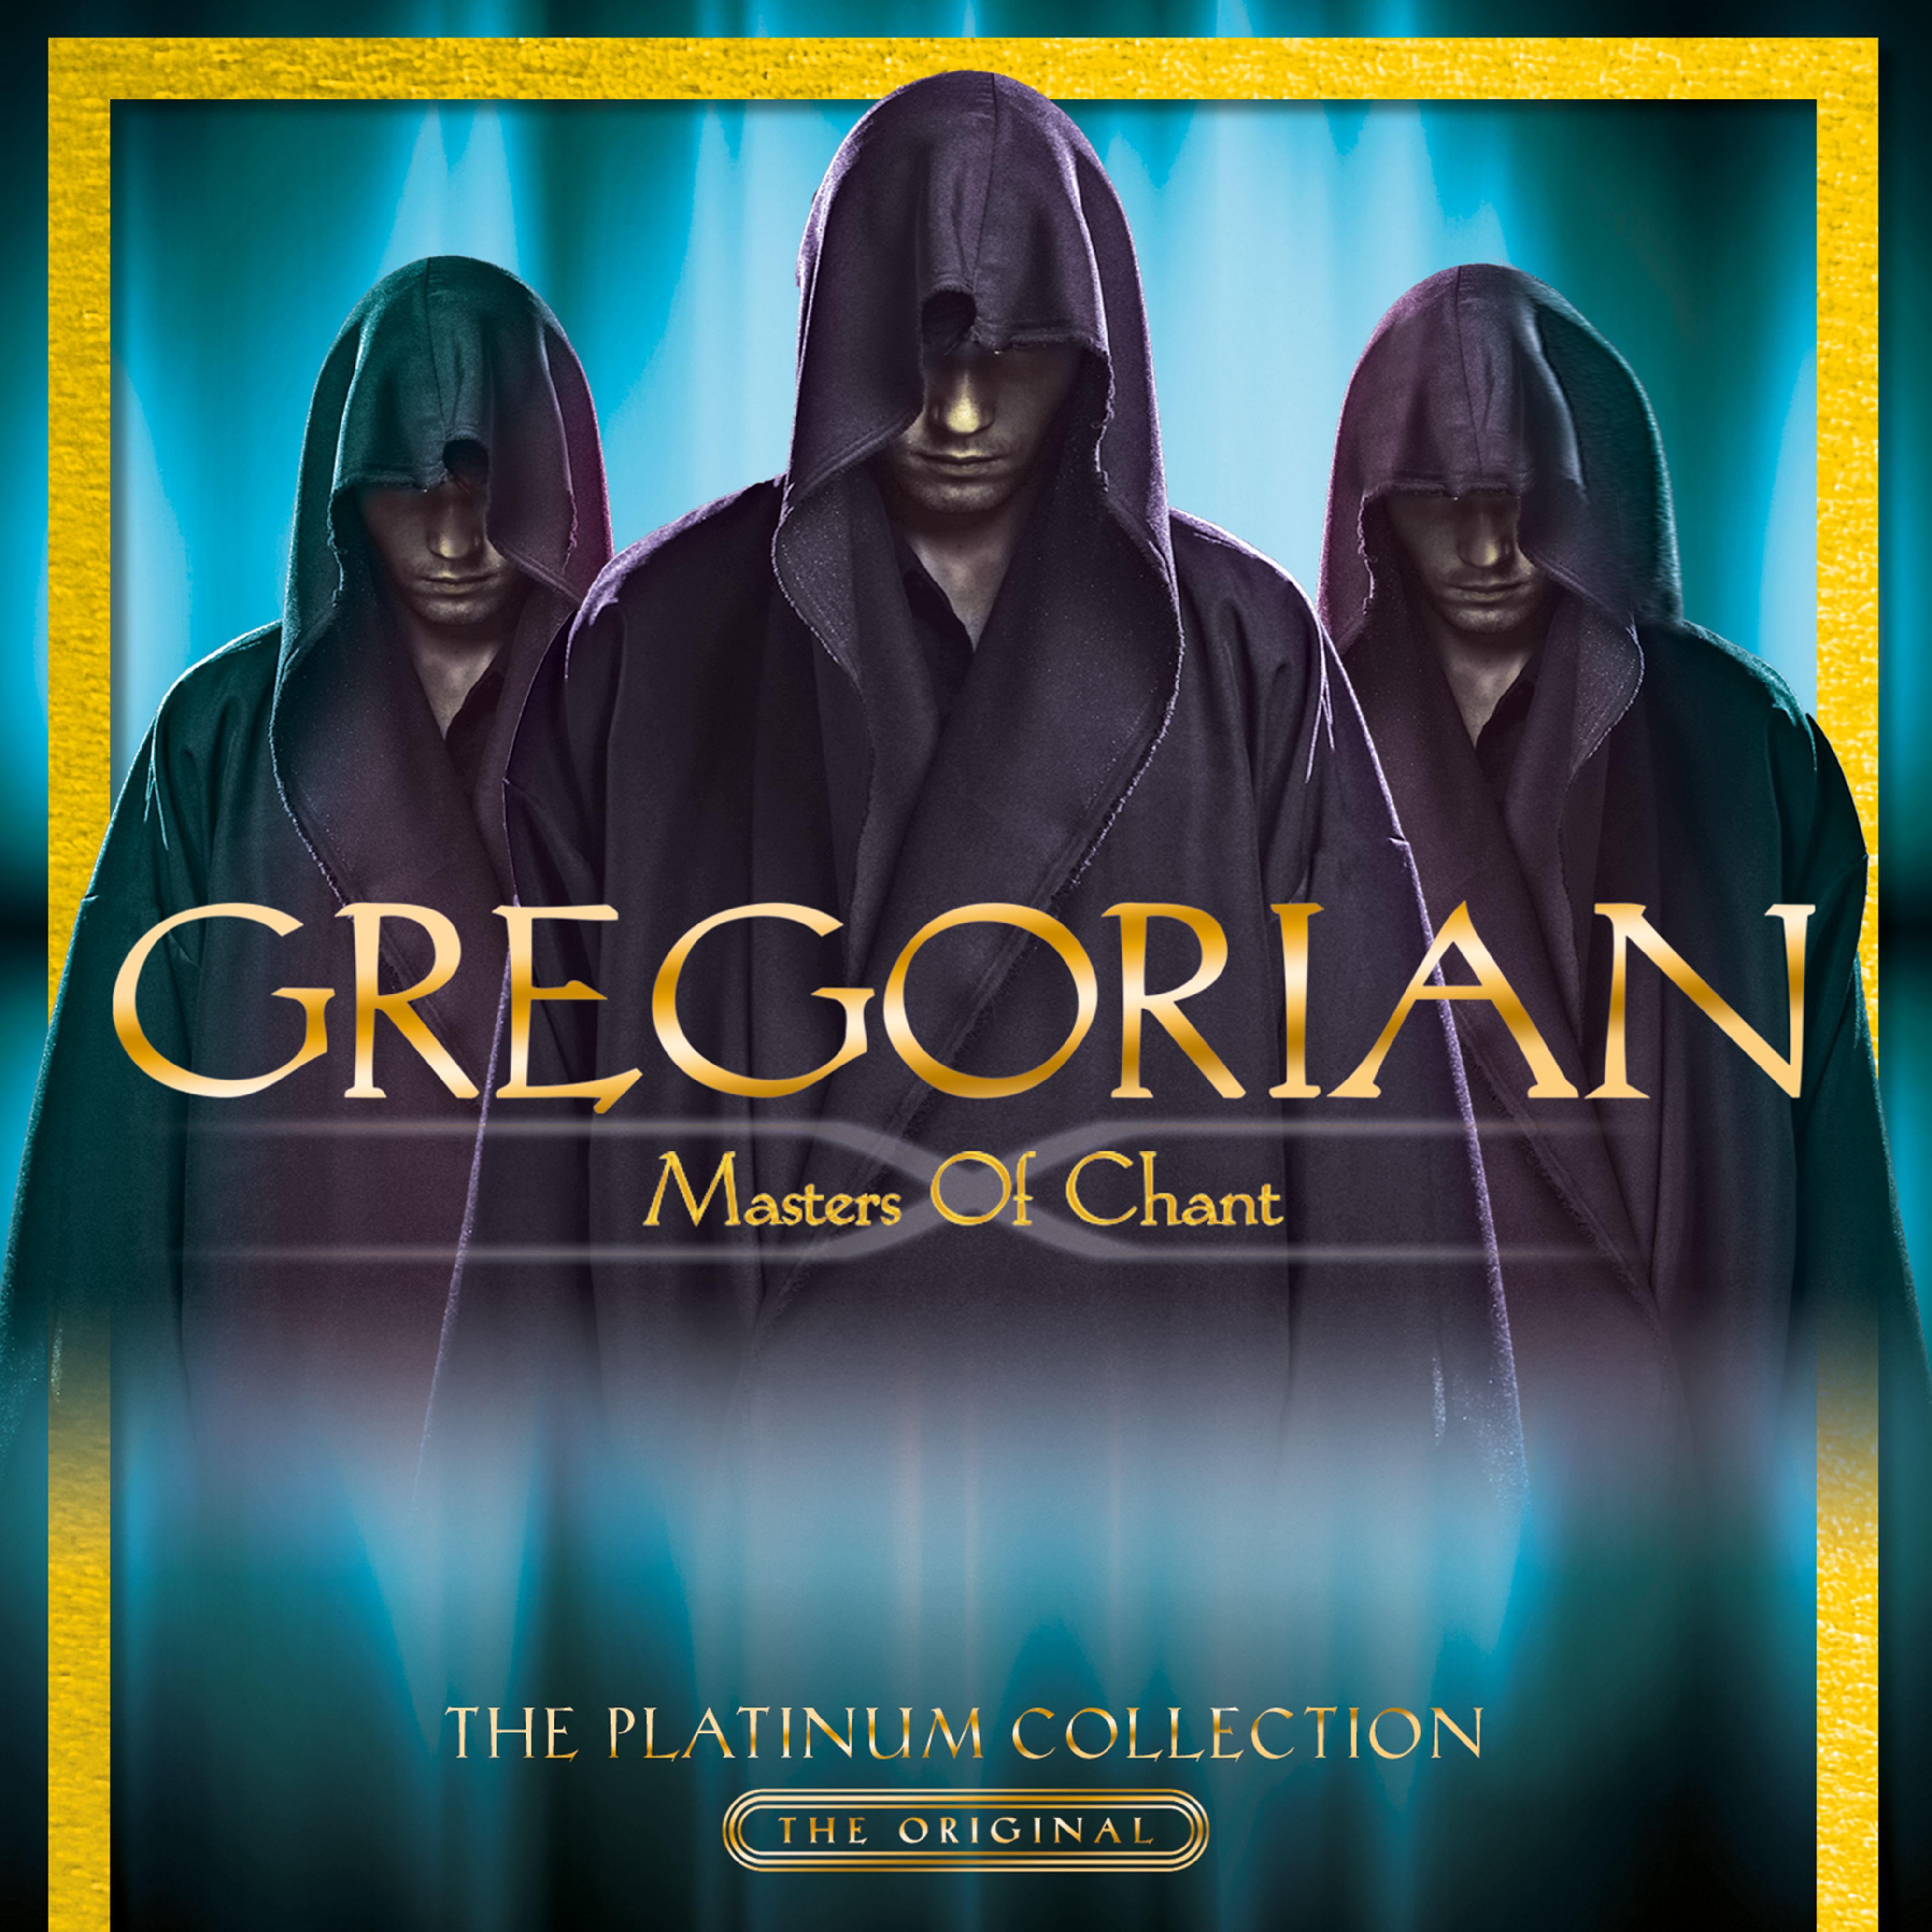 Gregorian - A Whiter Shade of Pale